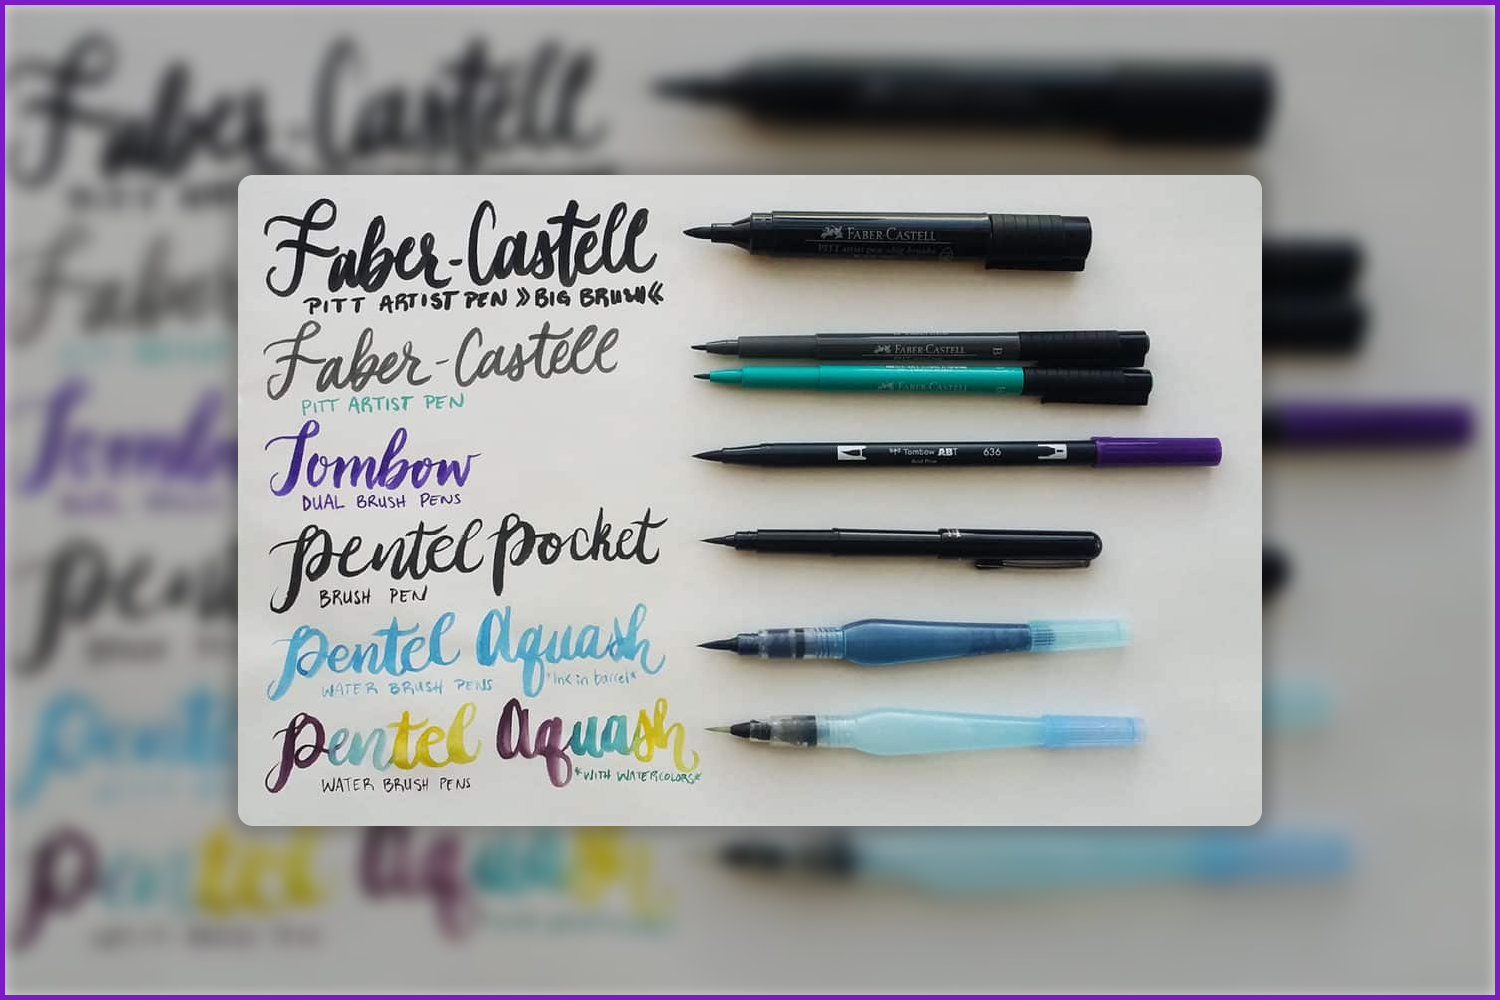 Image of Brush pens and text written by them.